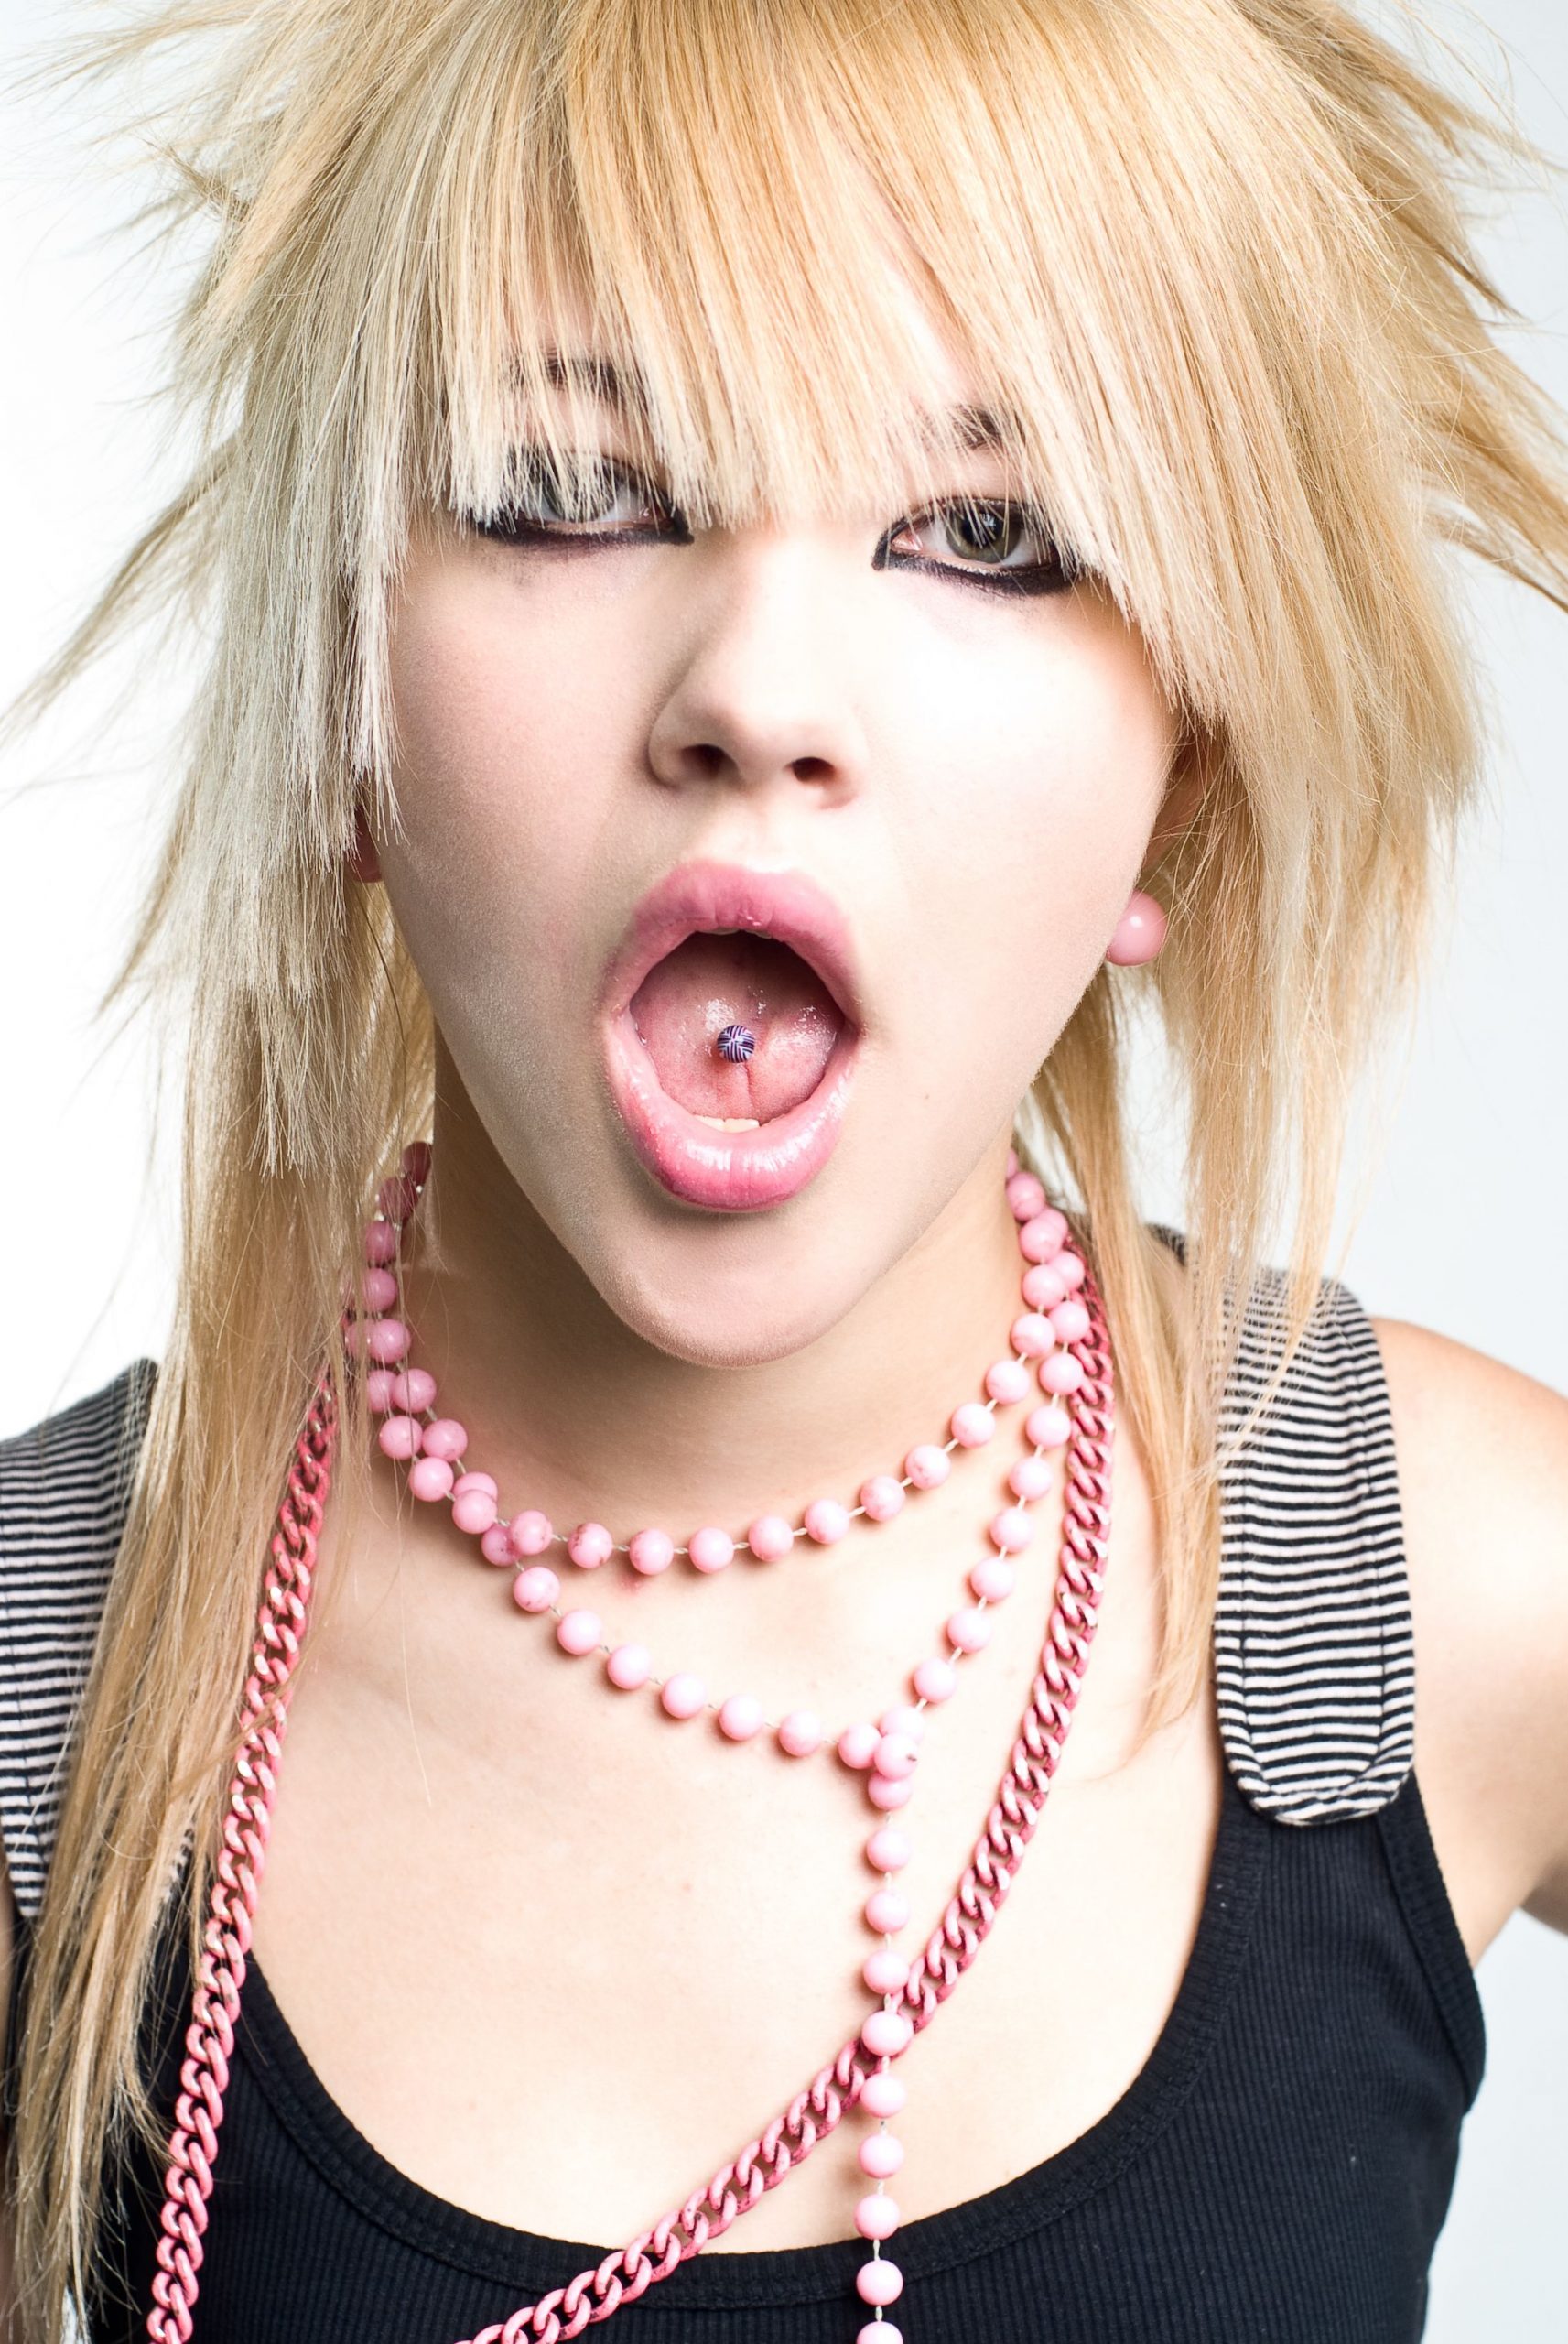 Caring For Your New Tongue Piercing So That It Heals Properly